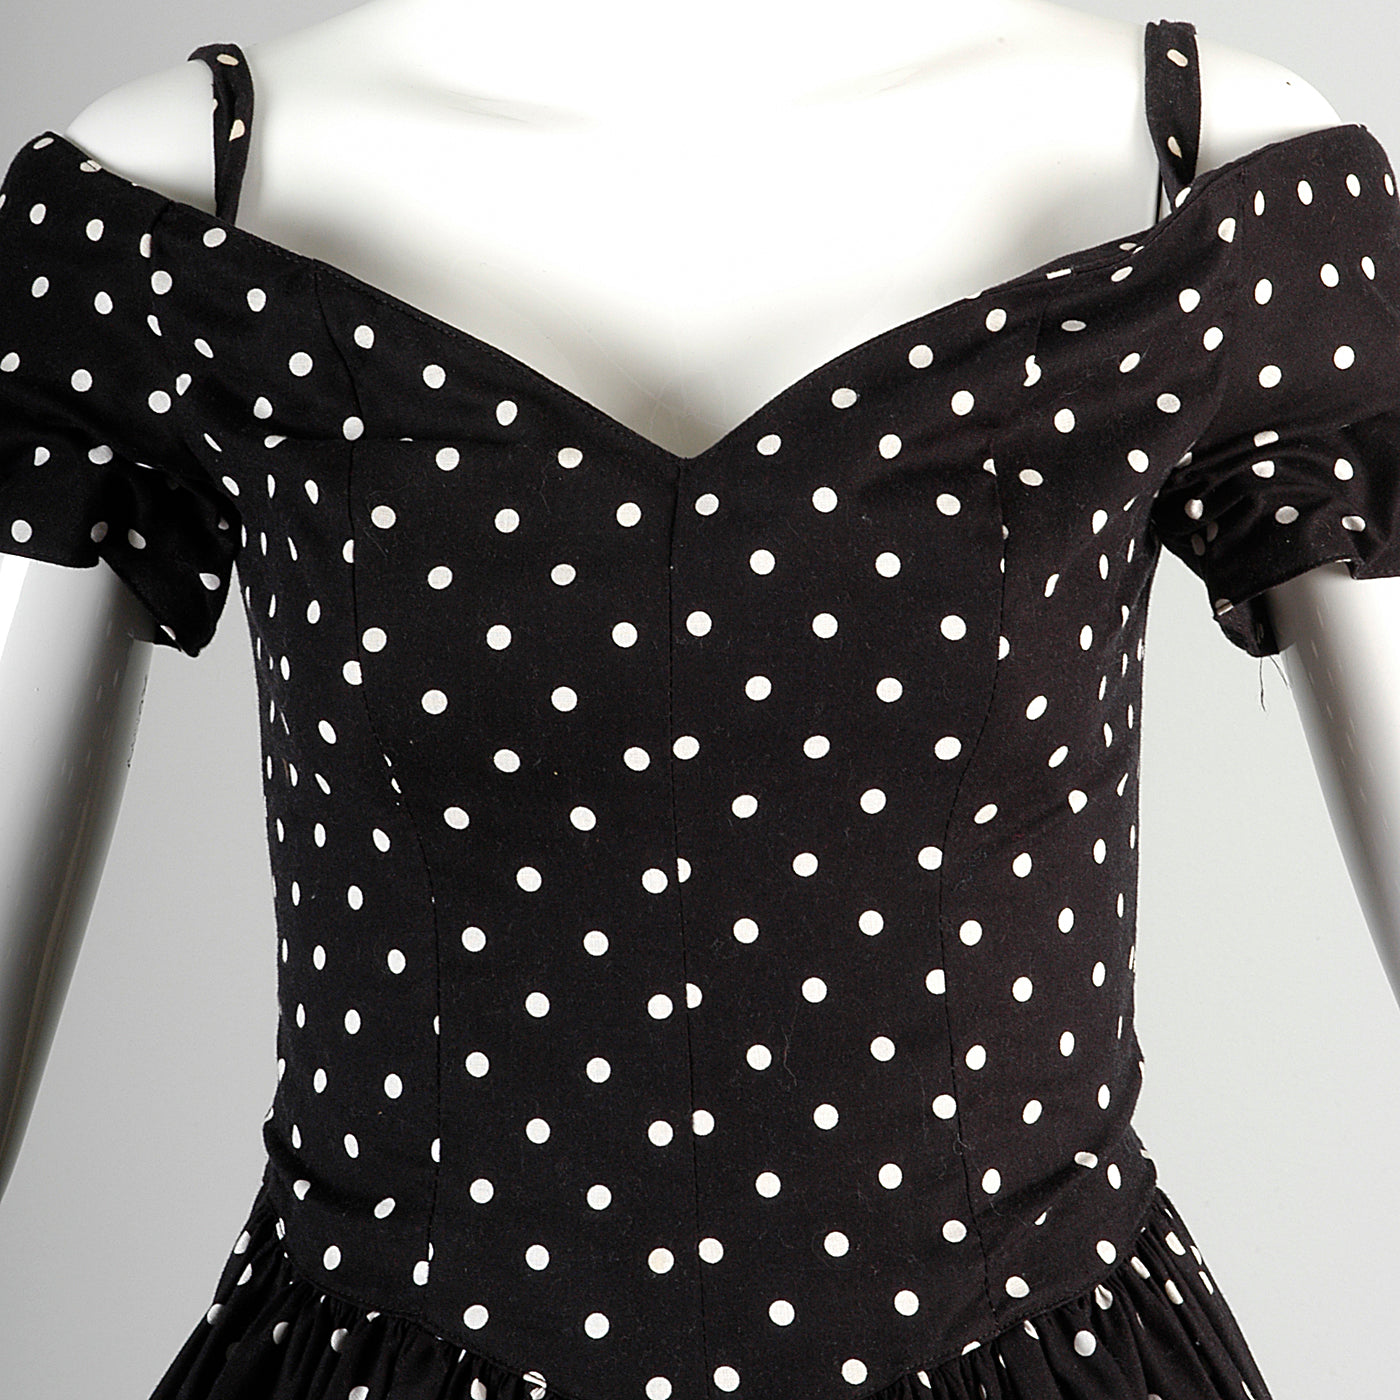 1980s I. Magnin Off Shoulder Party Dress in Black with White Polka Dots